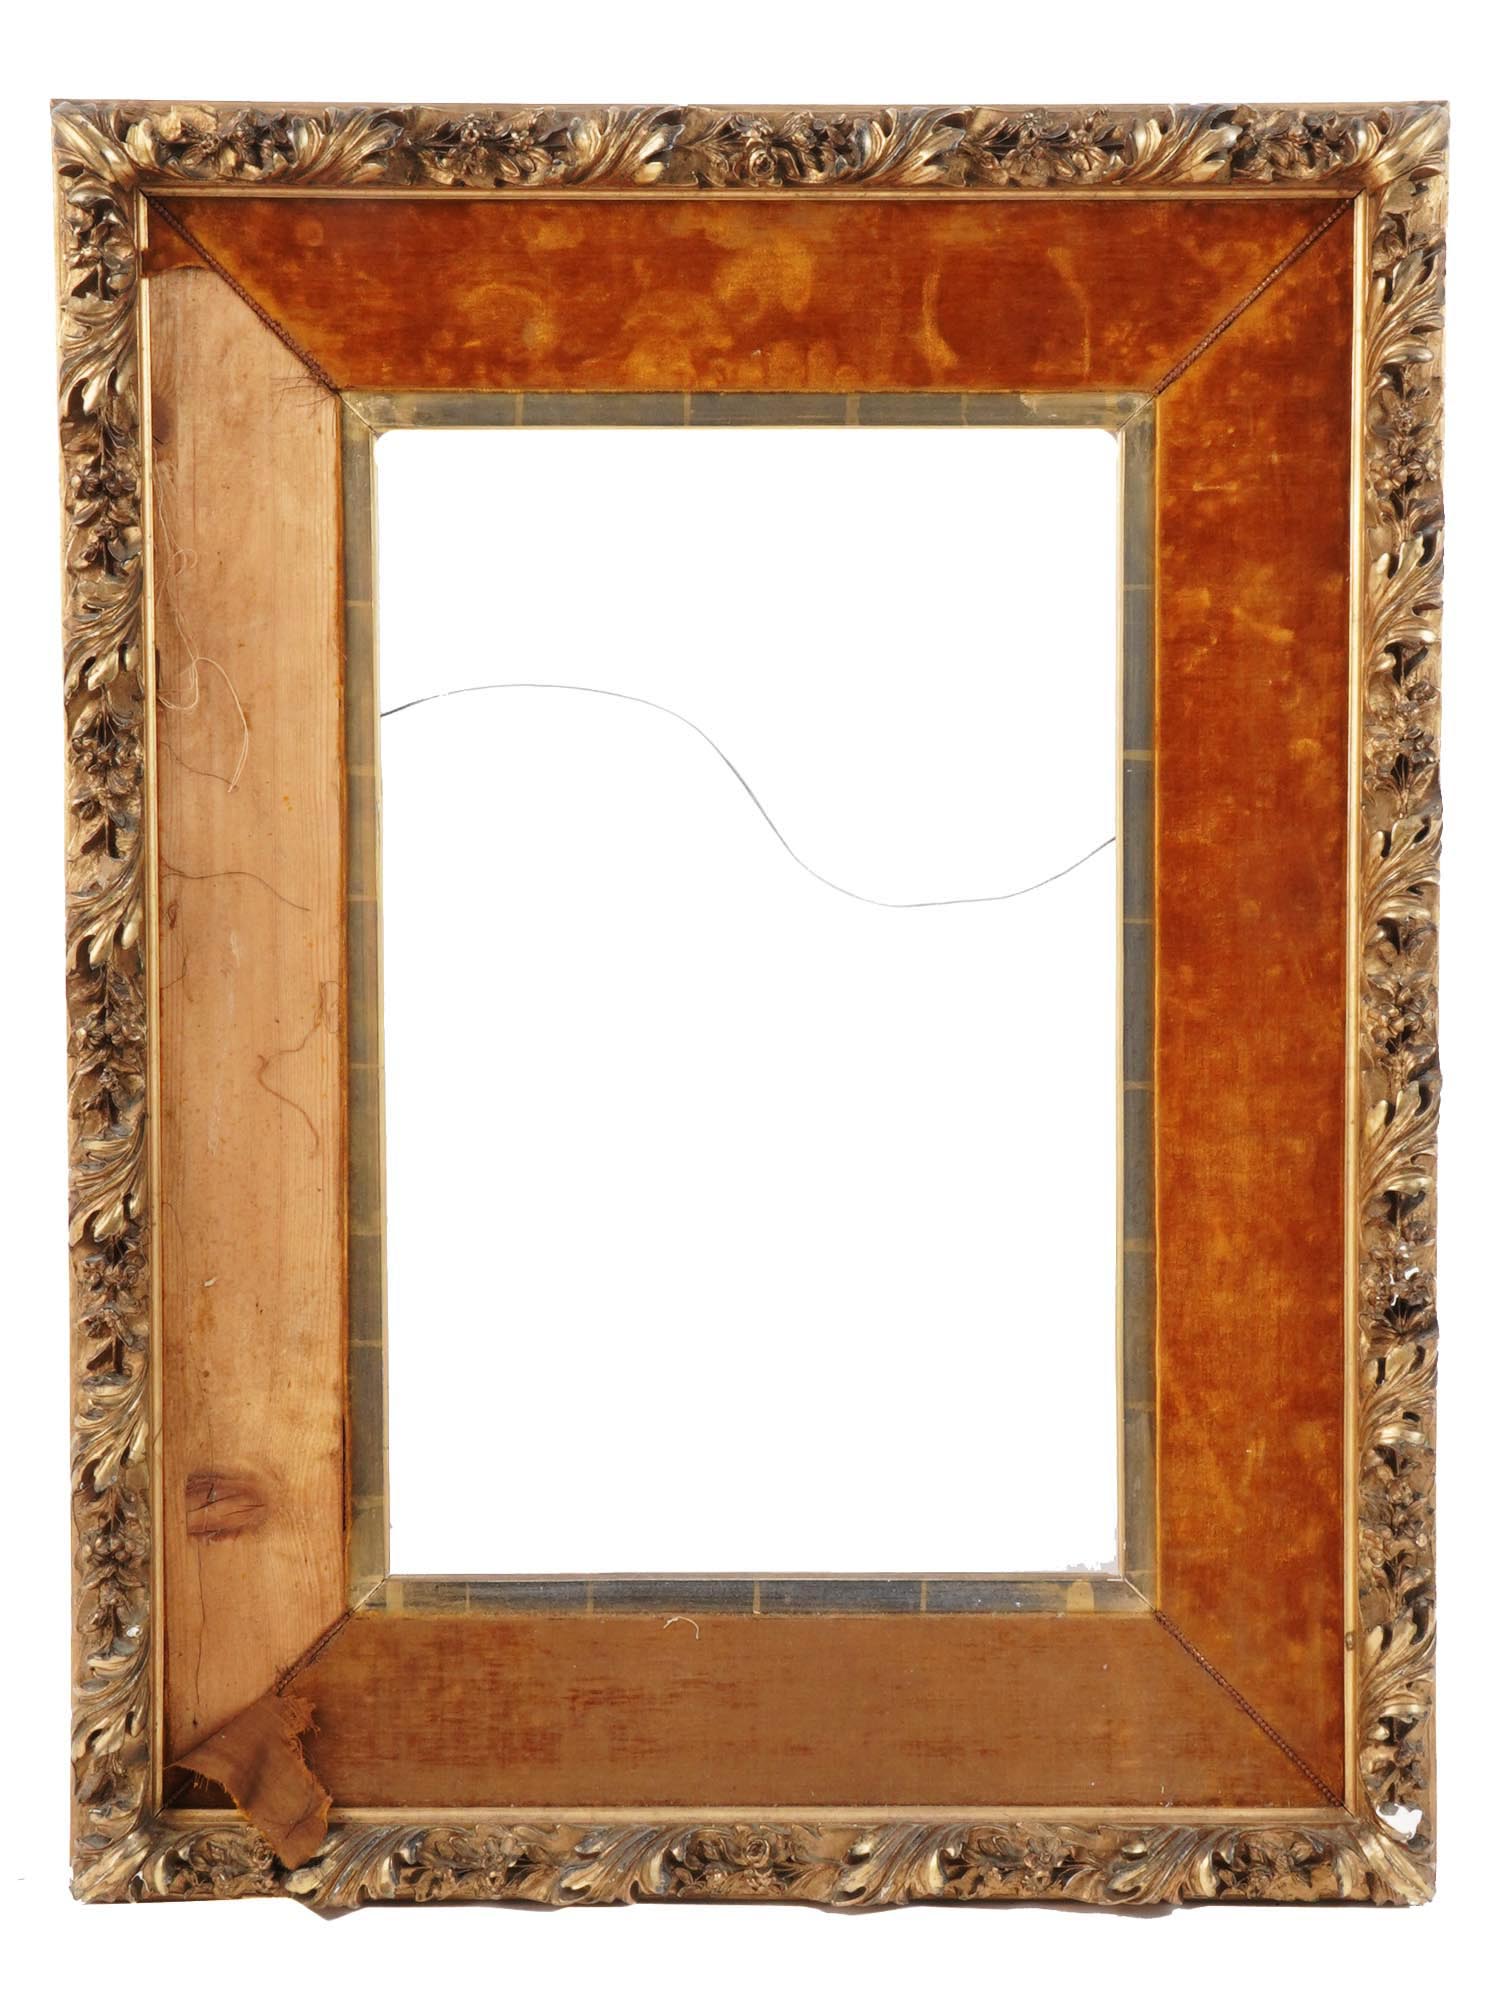 RECTANGULAR SHAPED VICTORIAN GILDED WOODEN FRAME PIC-0